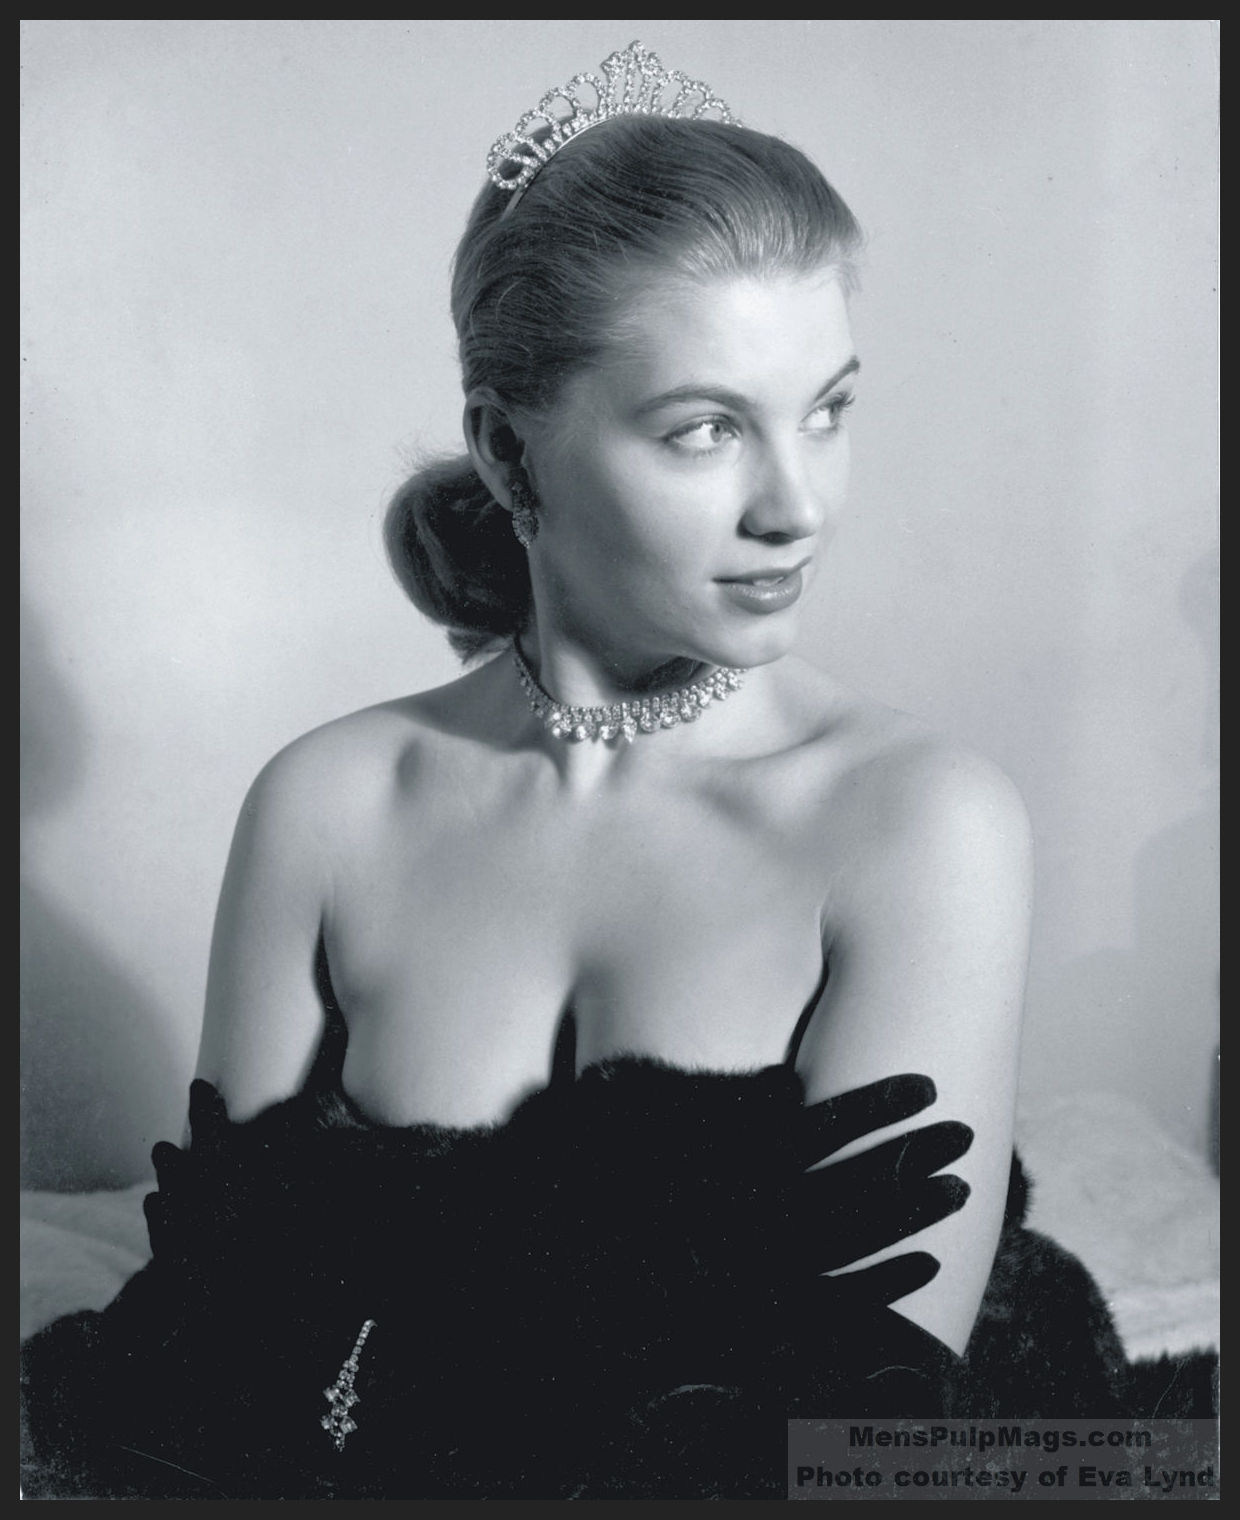 Photo of Eva Lynd by Earl Leaf (c. 1958) from Eva’s personal collection.